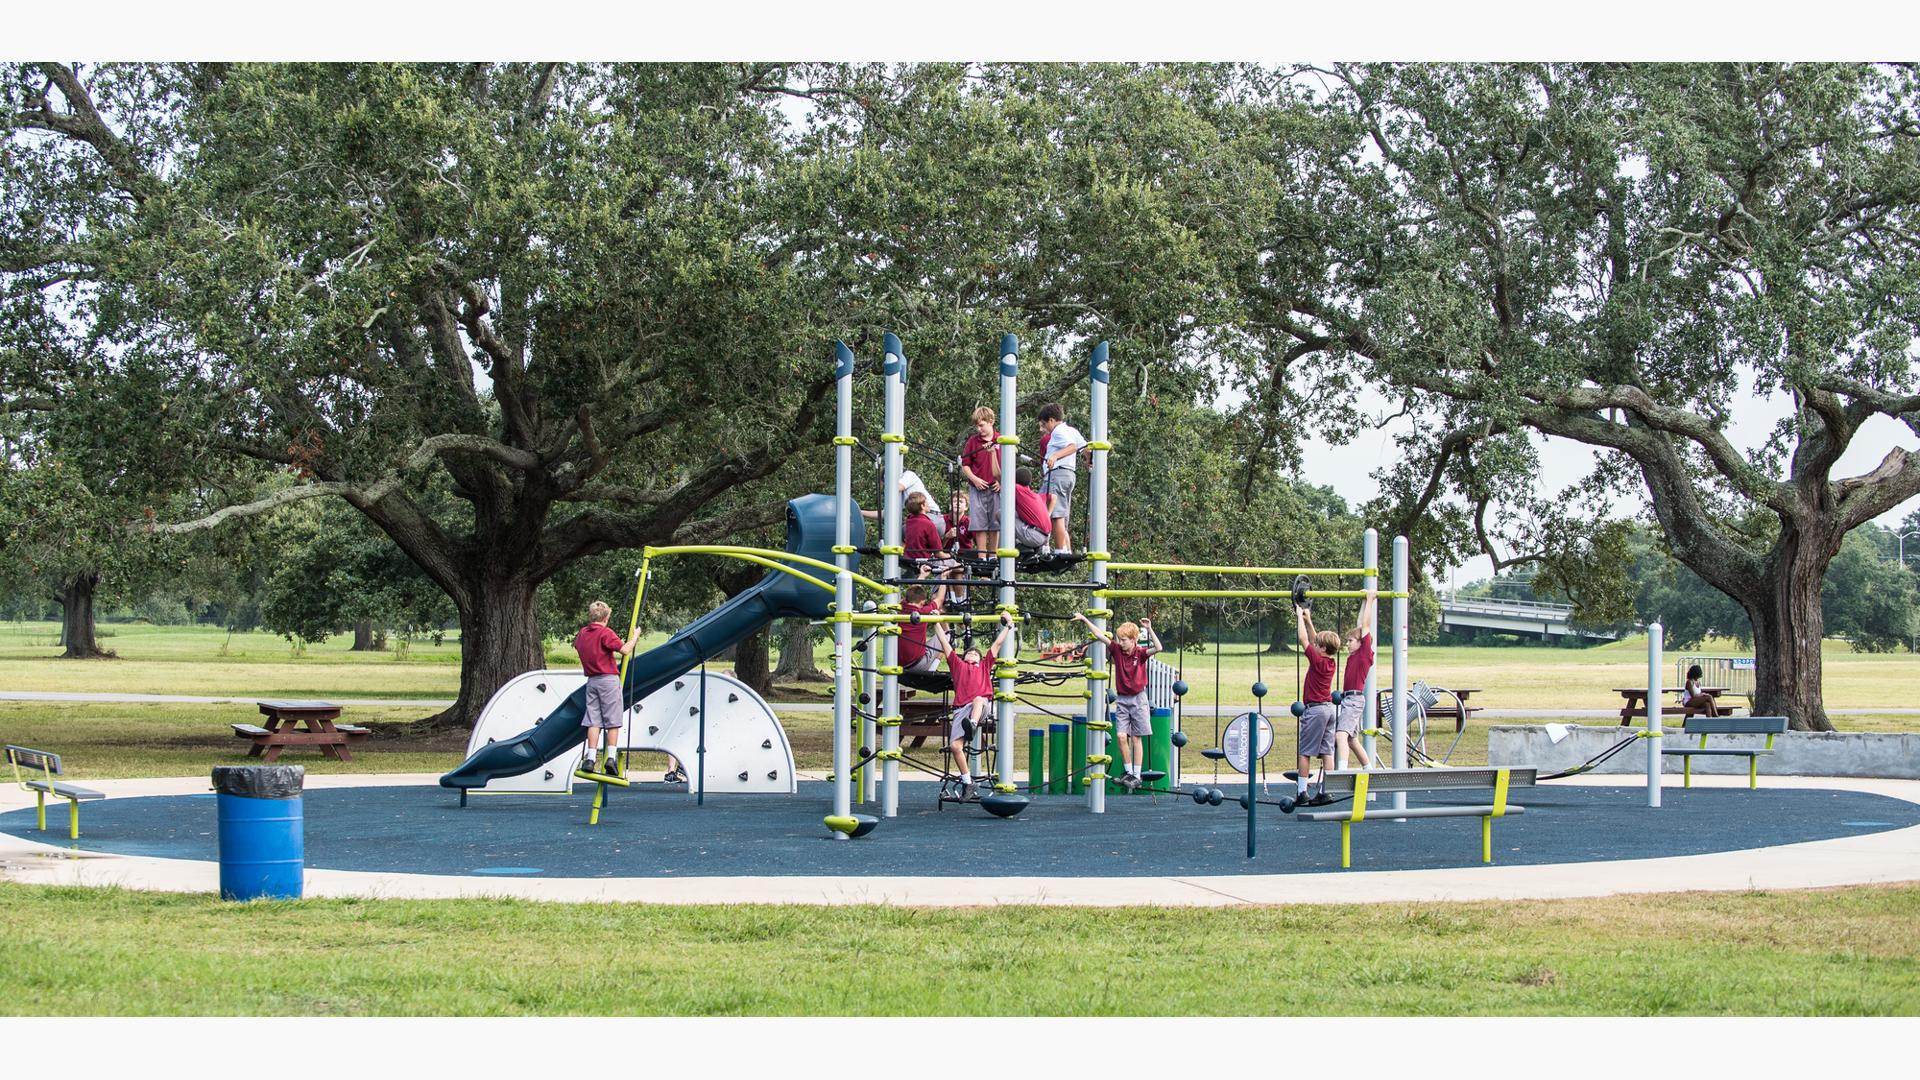 Boys in school uniforms playing on 7-post Netplex® PlayBooster play structure in a park.